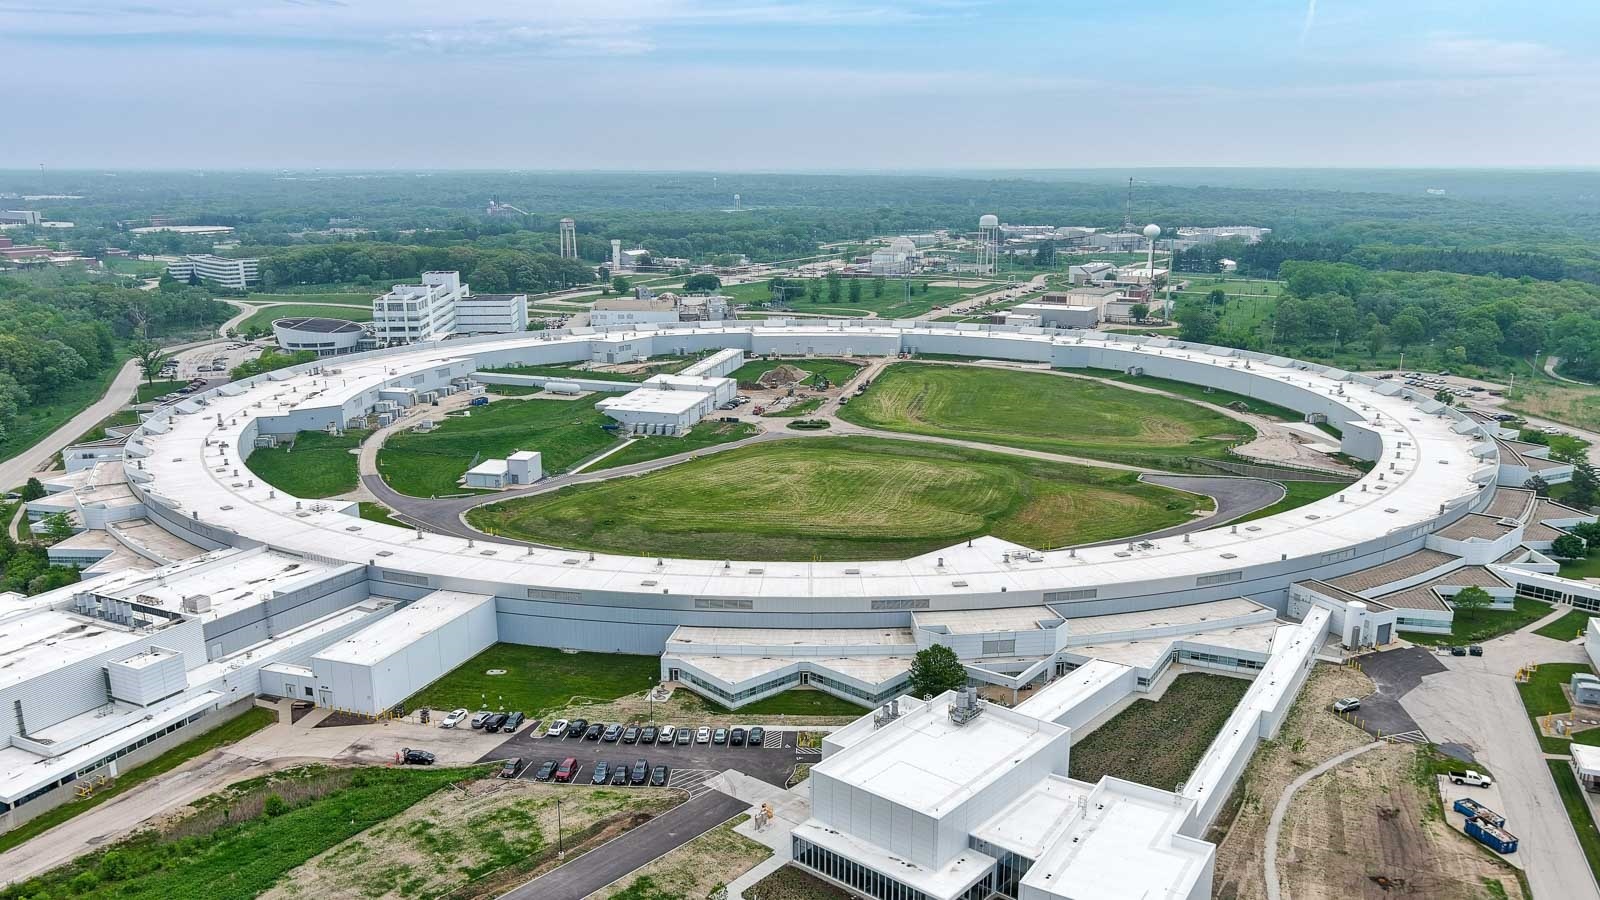 The Advanced Photon Source at Argonne is one of the most productive X-ray light sources in the world. In a typical year, 5,500 scientists from around the world use it for research in a wide variety of disciplines. (Image by Argonne National Laboratory.)